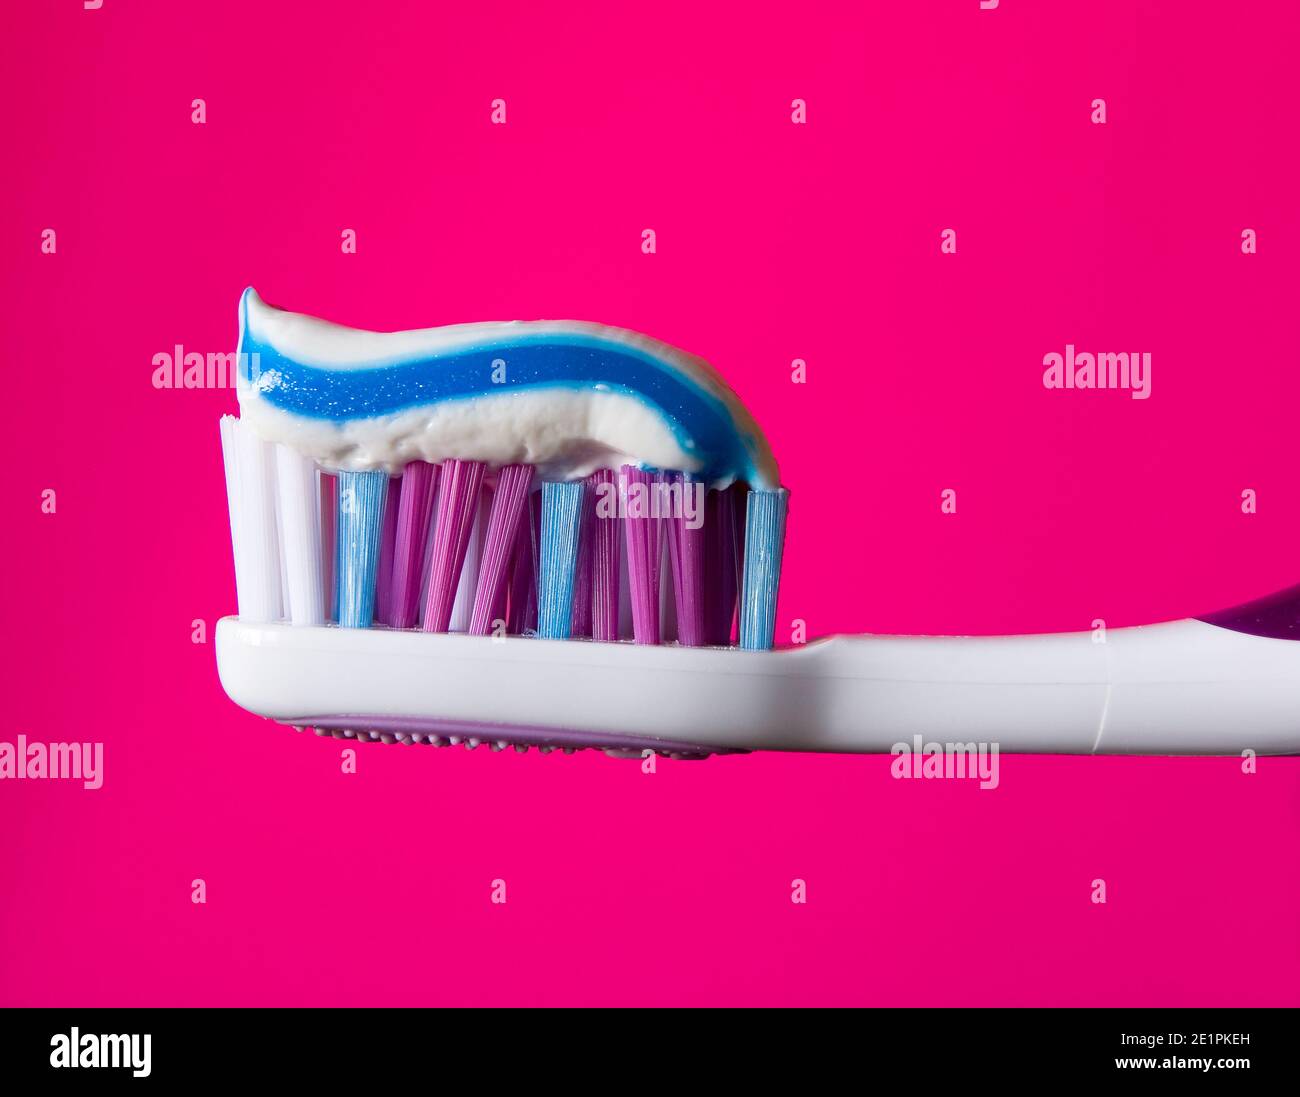 Beautiful multi-colored toothbrush with toothpaste close-up. Hygiene products. Stock Photo